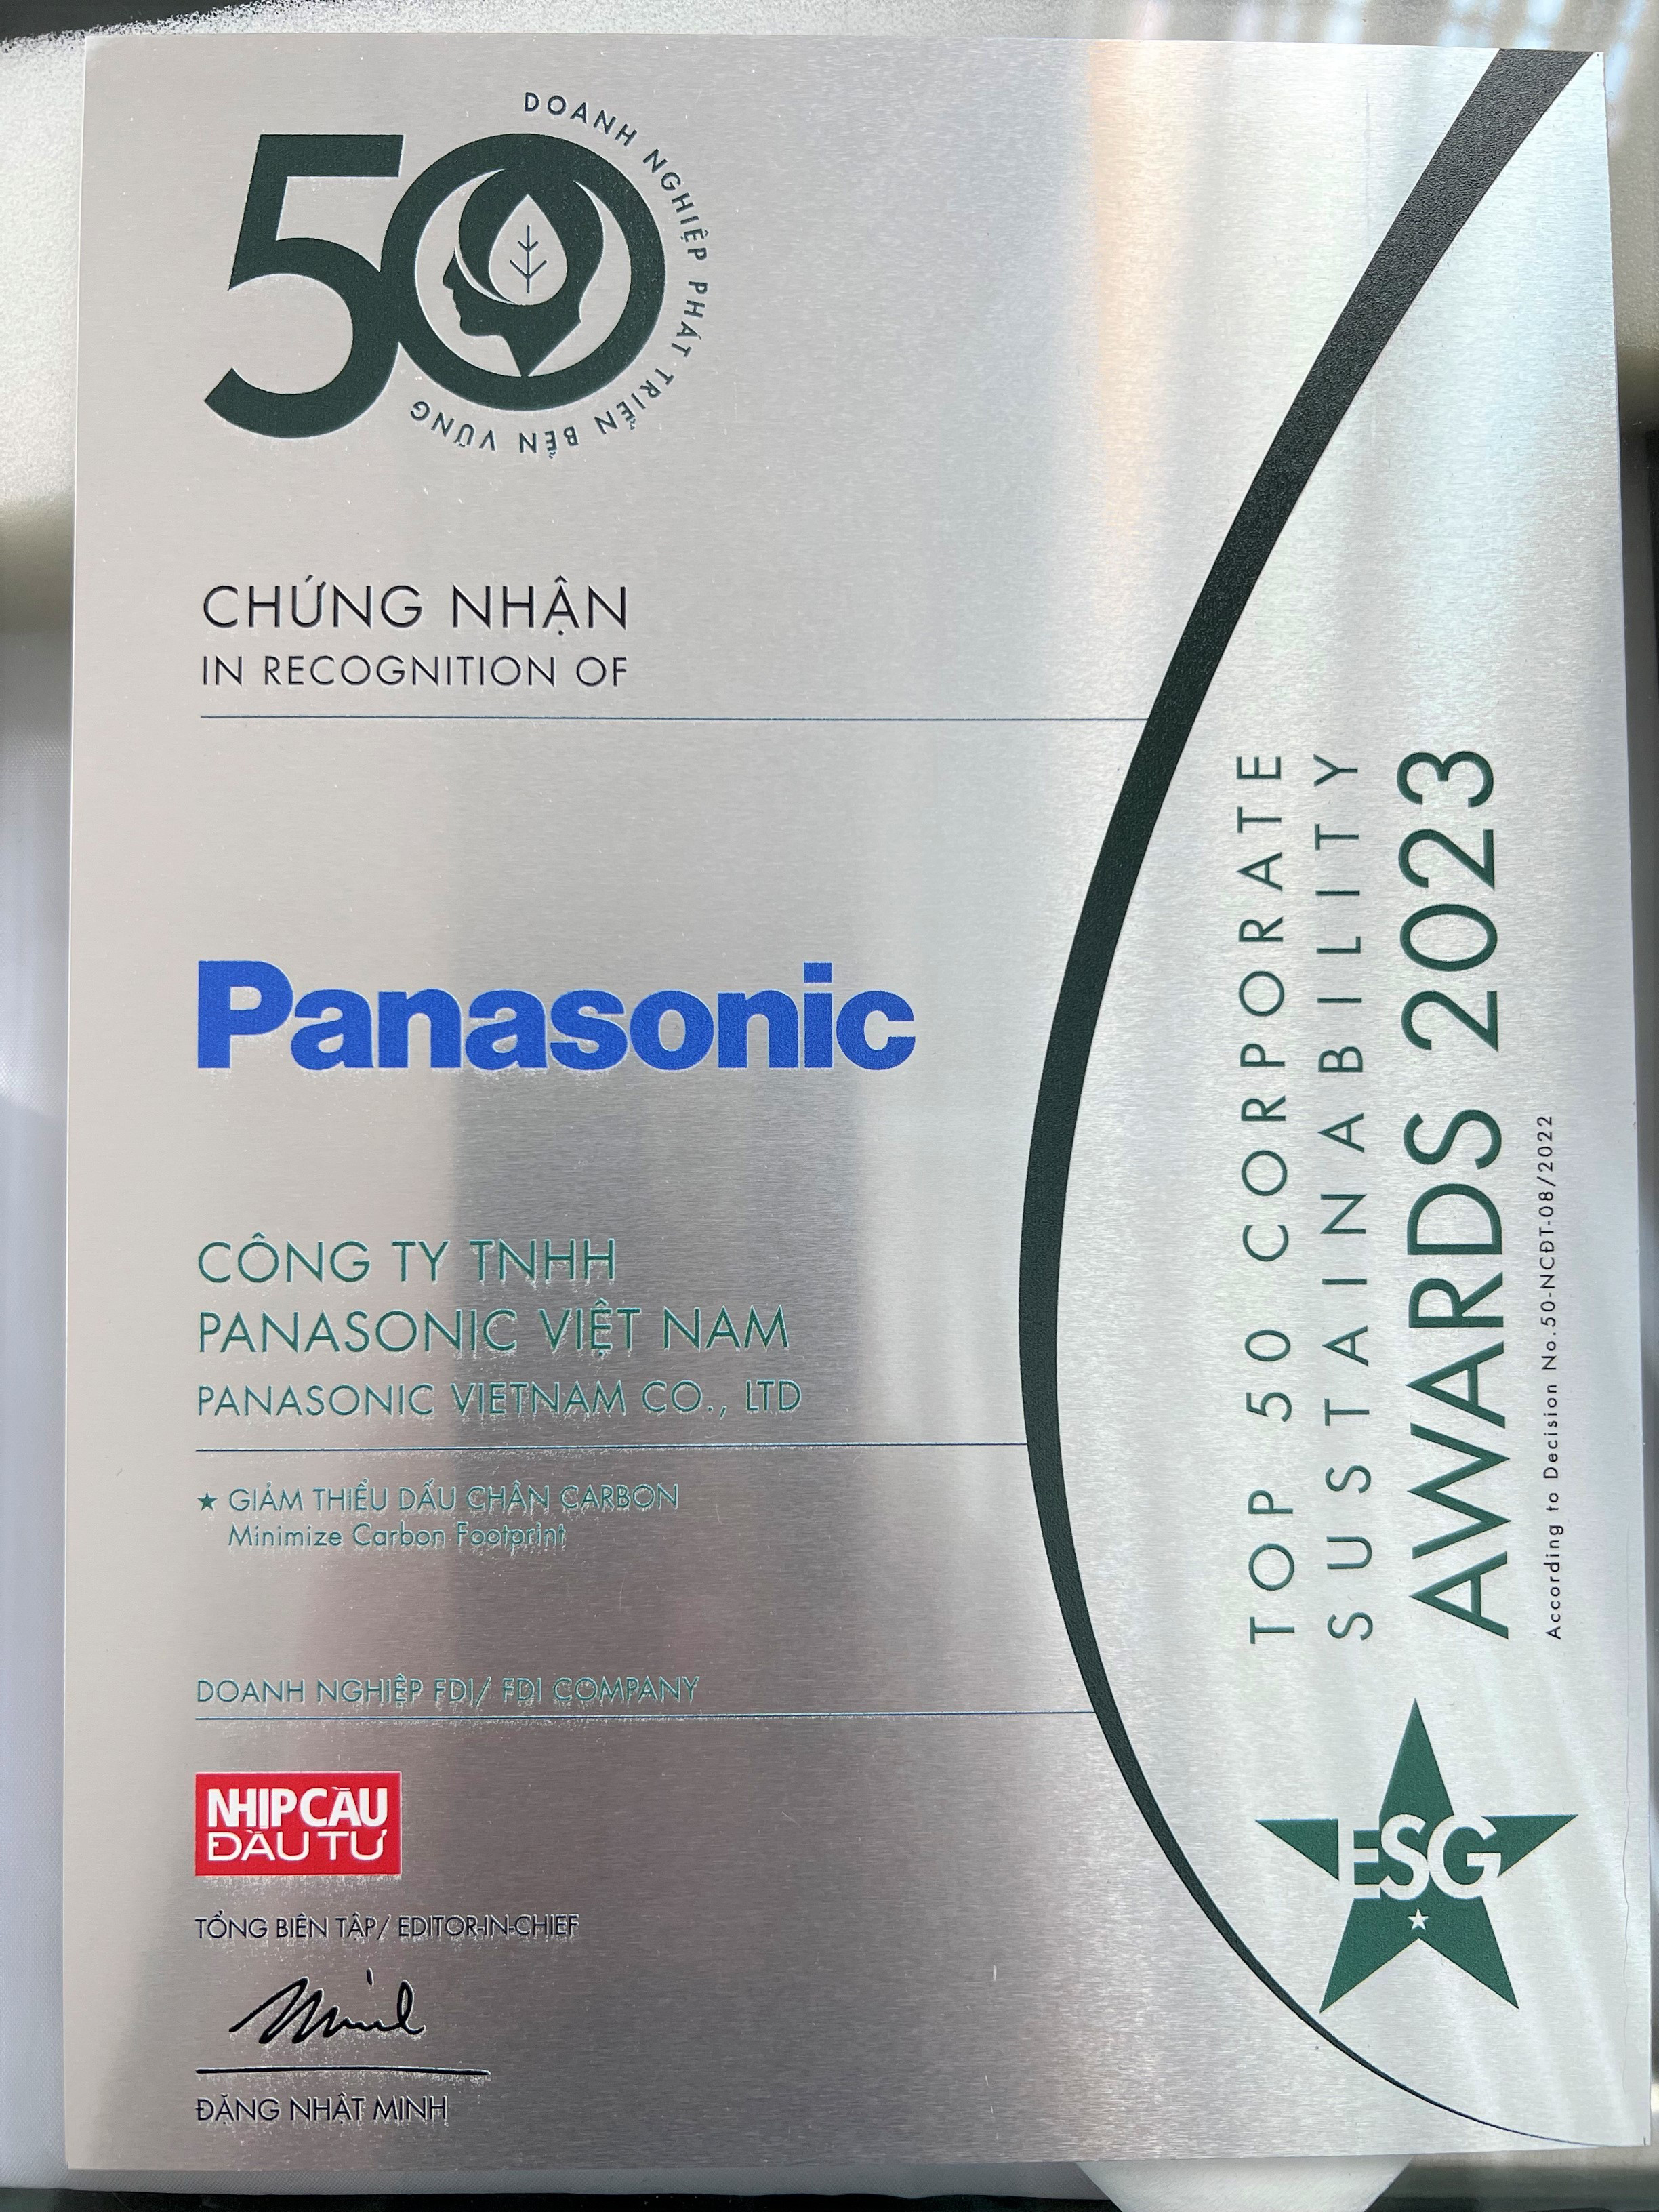 Panasonic was honored as TOP Sustainable Enterprises with the highlight for effort of minimizing carbon emission